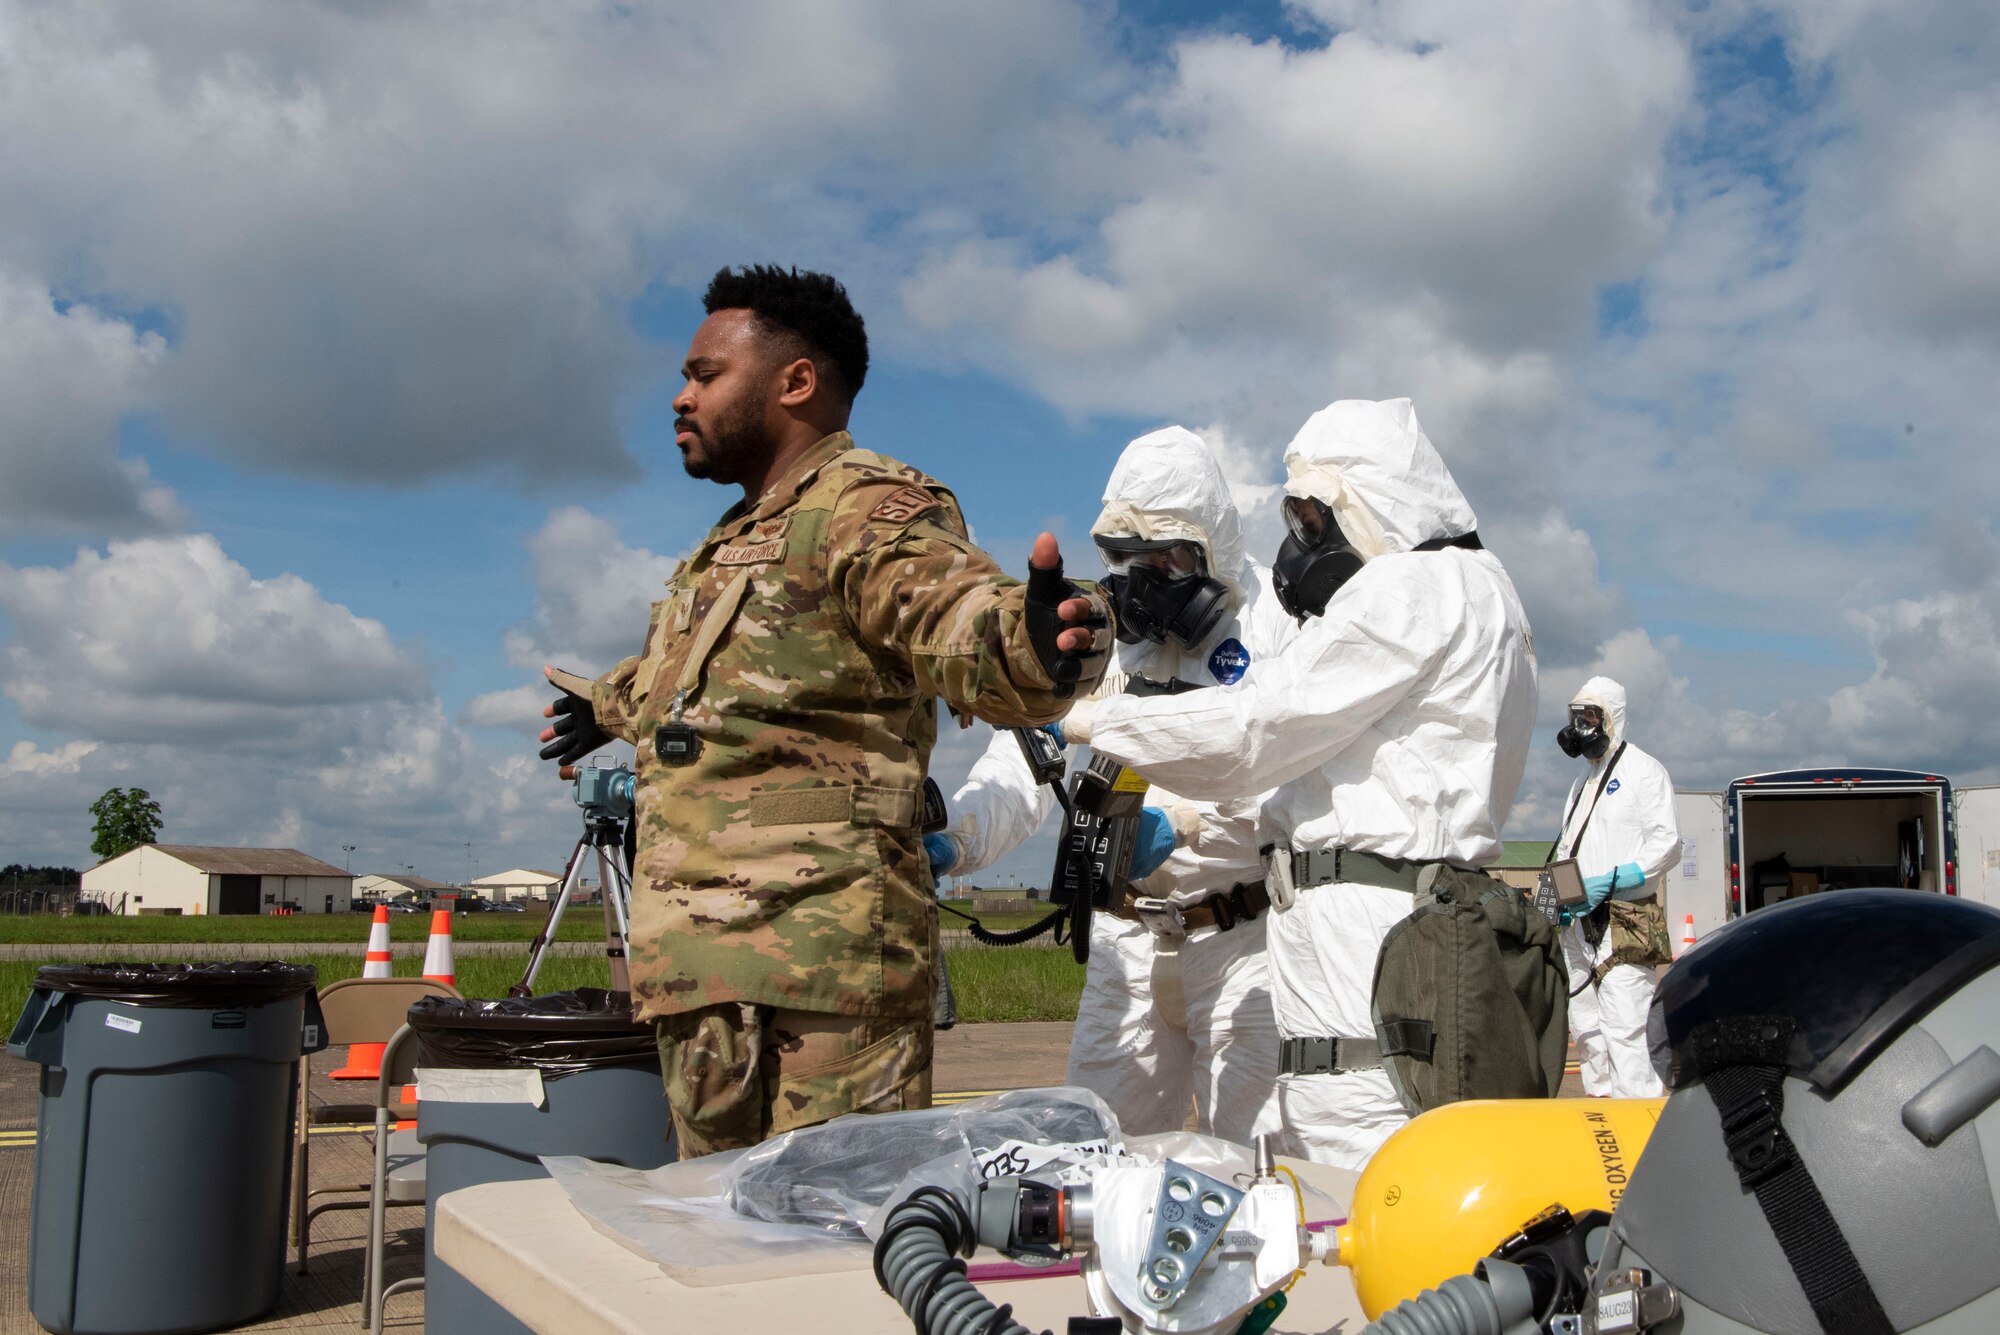 U.S. Air Force Staff Sgt. Victor Williams, 21st Surveillance Squadron Detachment 1 special equipment operator is scanned by Airman 1st Class Ethan Harlan and Airman 1st Class Miranda Dickinson, 100th Civil Engineer Squadron emergency management journeymen for contamination during an Aircraft Radiological Recovery Plan training event at Royal Air Force Mildenhall, England, May 11, 2023. The WC-135 Constant Phoenix aircraft provides a scientific mission supporting the nuclear treaty monitoring mission of the Air Force Technical Applications Center. AFTAC has been directing missions for U.S. verification of nuclear treaties for more than 35 years. (U.S. Air Force photo by Tech. Sgt. Anthony Hetlage)